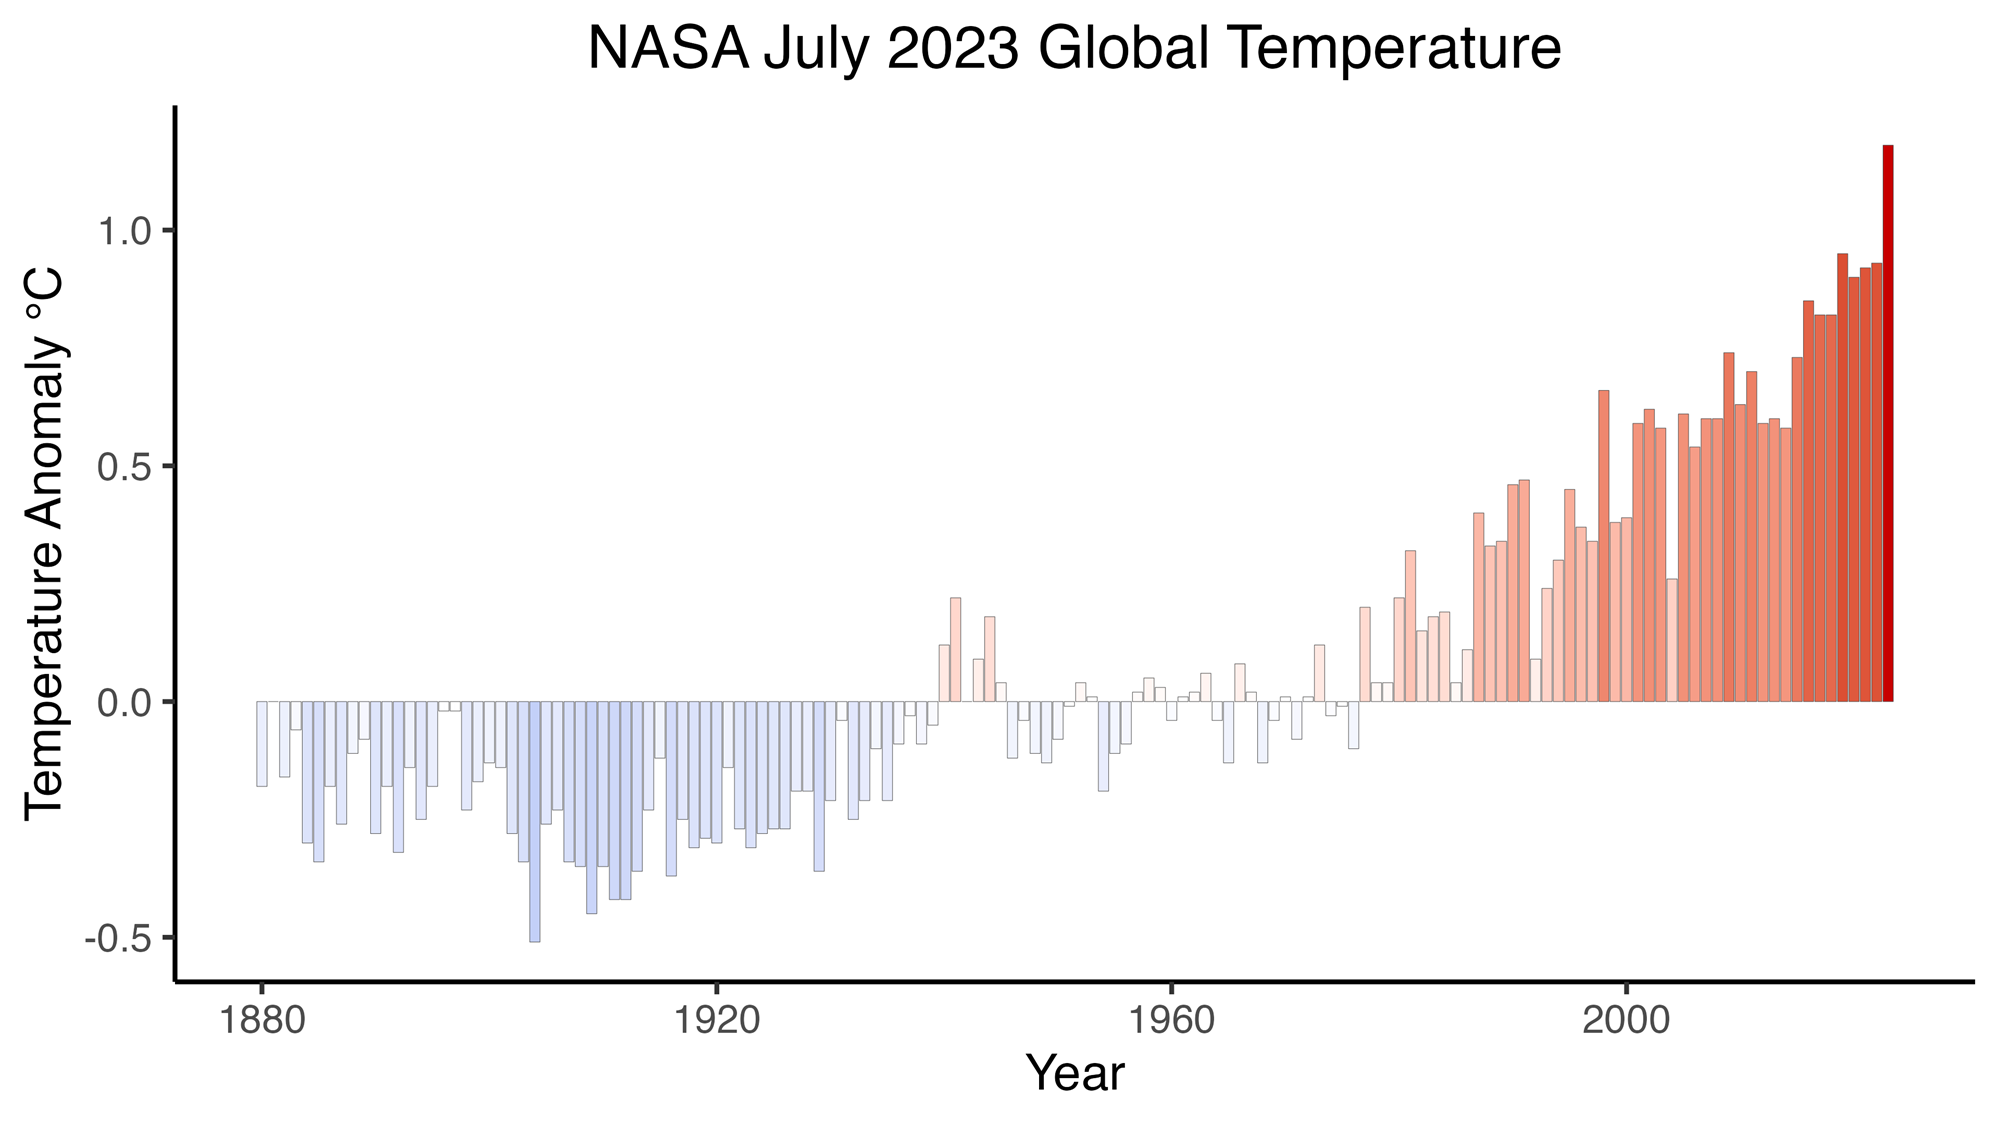 A chart showing temperature anomaly for July from 1880 to current time, generally increasing